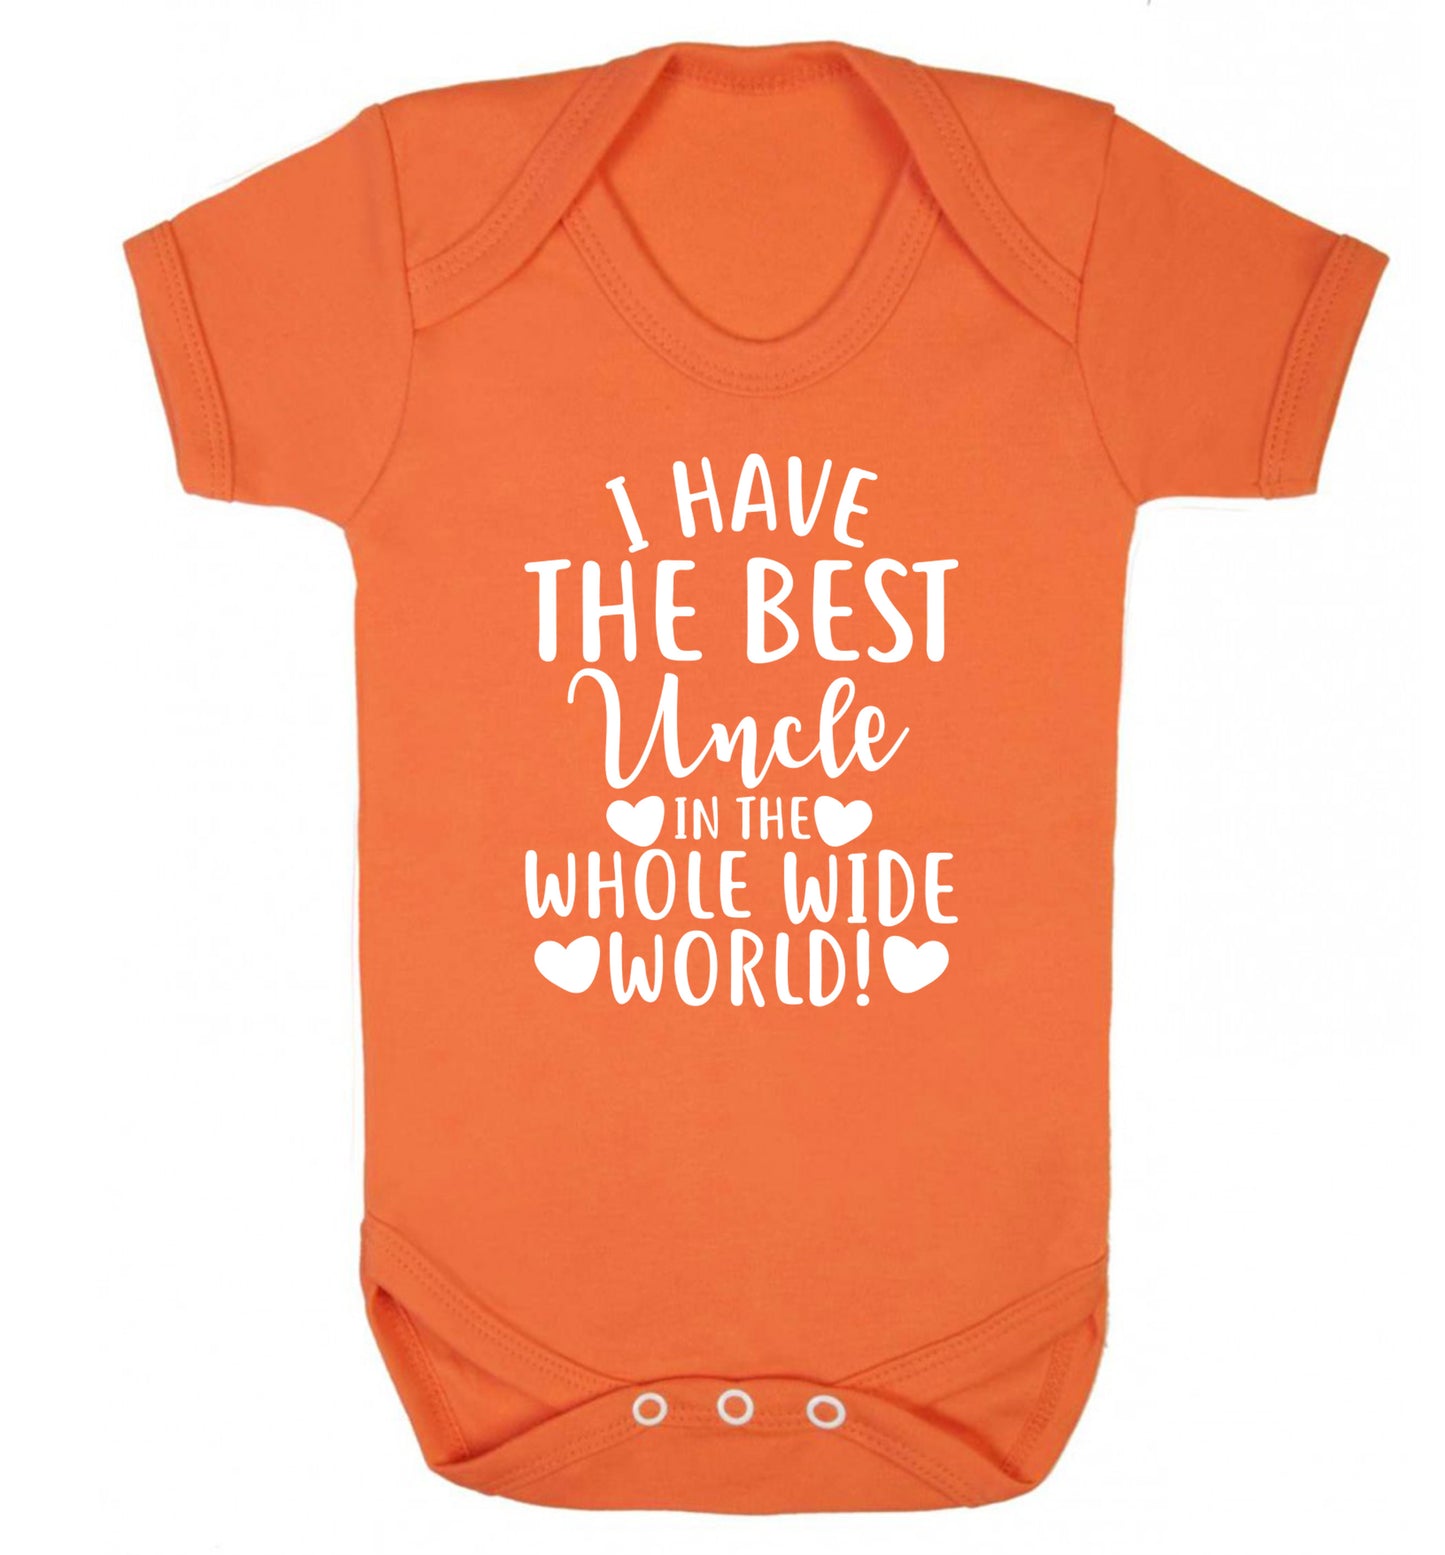 I have the best uncle in the whole wide world! Baby Vest orange 18-24 months